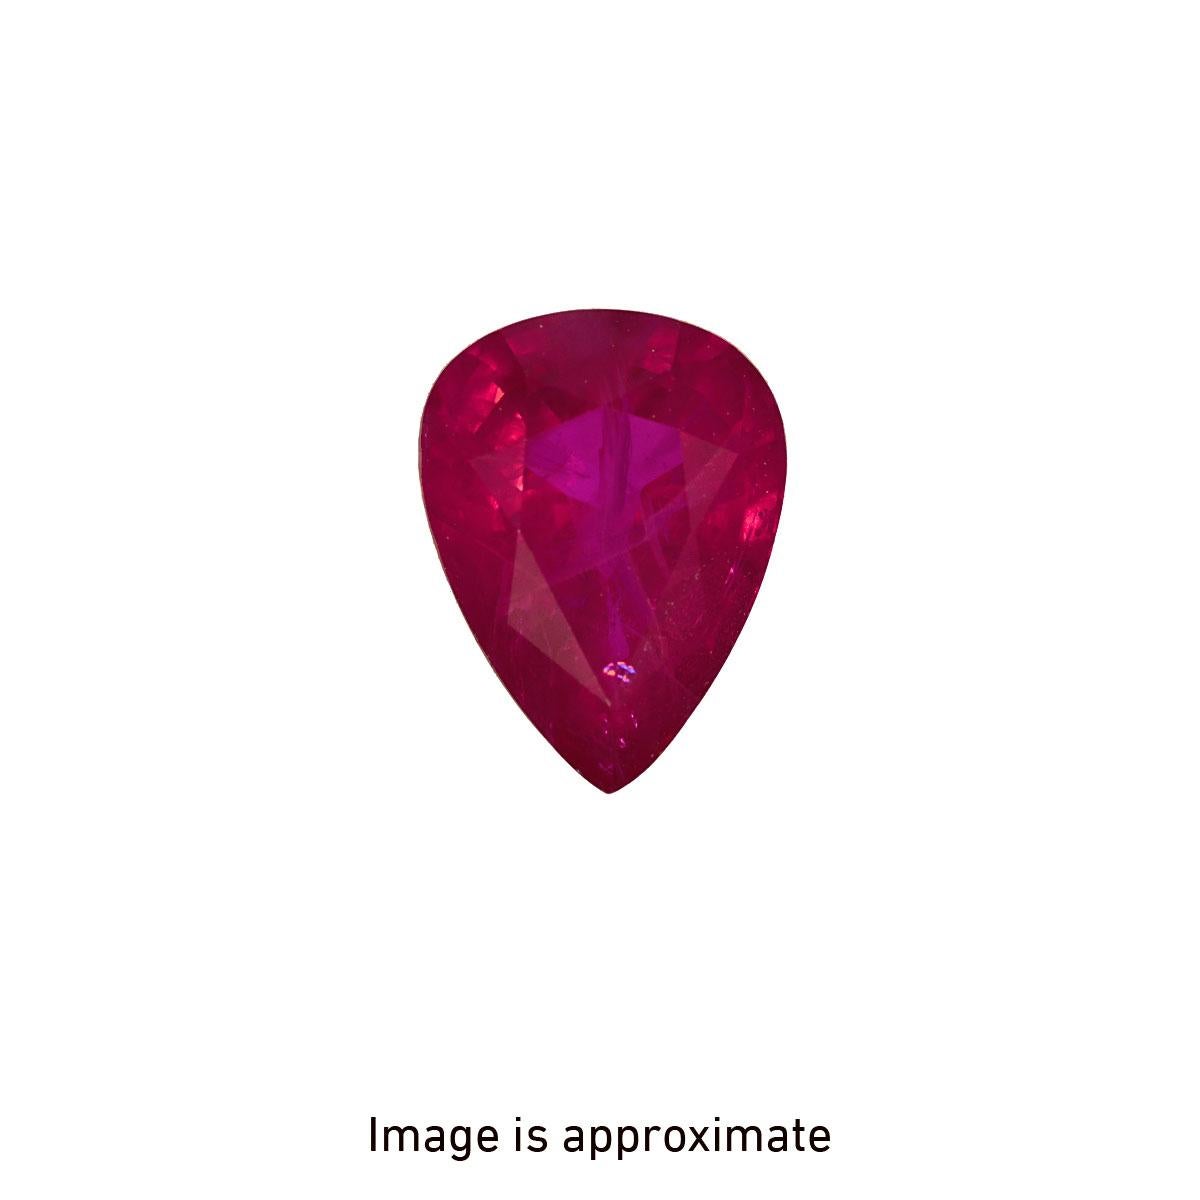 18K white and yellow gold ring, featuring a dazzling 3.82-carat, pear-shaped Burmese Ruby, surrounded by 30 round white diamonds weighing 0.58 carats. This rare Ruby is GIA certified. 